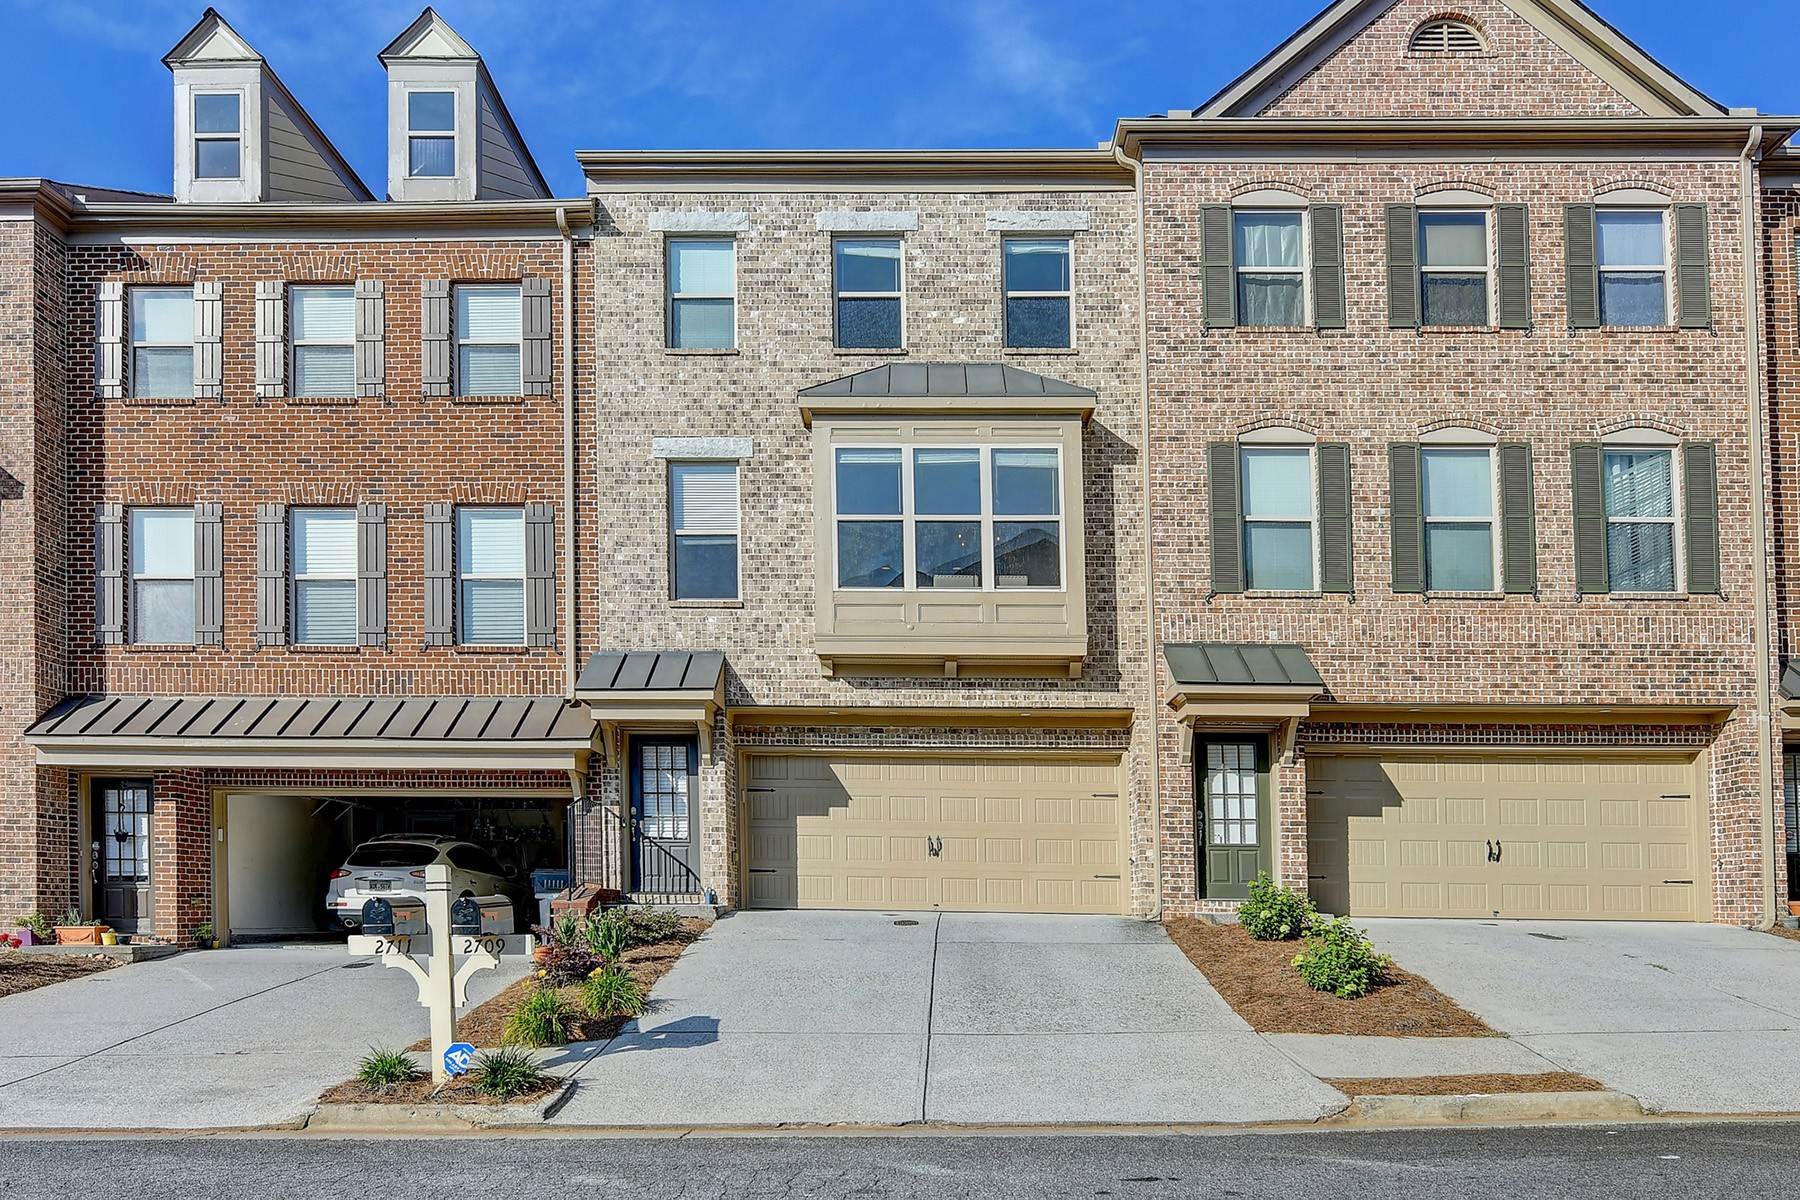 Townhouse for Sale at Move-In Ready Townhome in Gated Suwanee Community 2709 Hallwood Lane Suwanee, Georgia 30024 United States